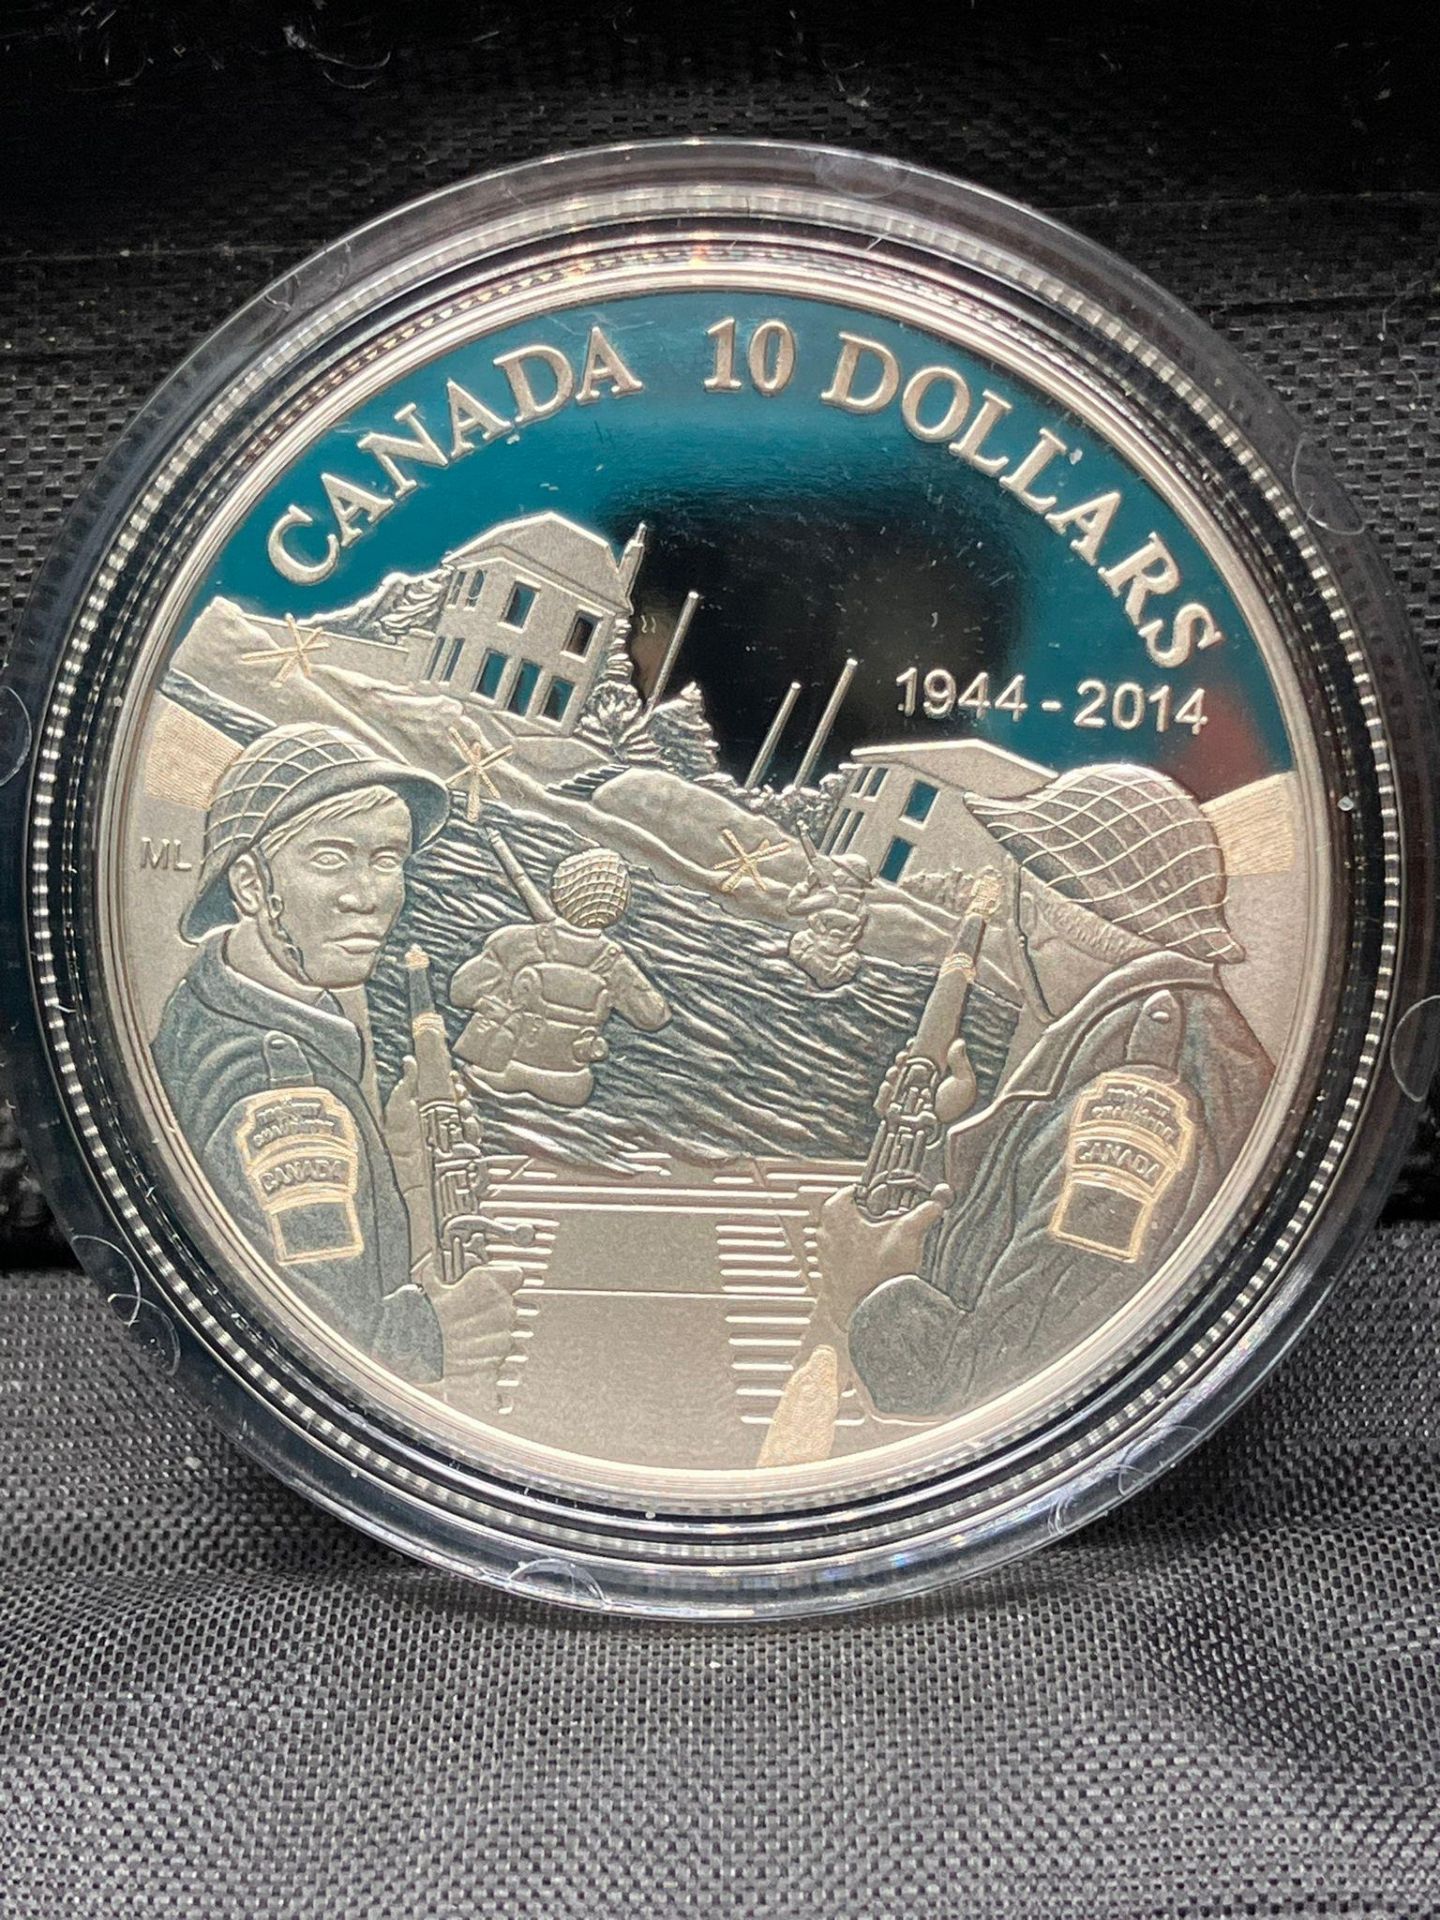 2014 CANADIAN D-DAY 10 DOLLAR COIN. Struck in PURE SILVER by the Royal Canadian Mint to - Bild 6 aus 7